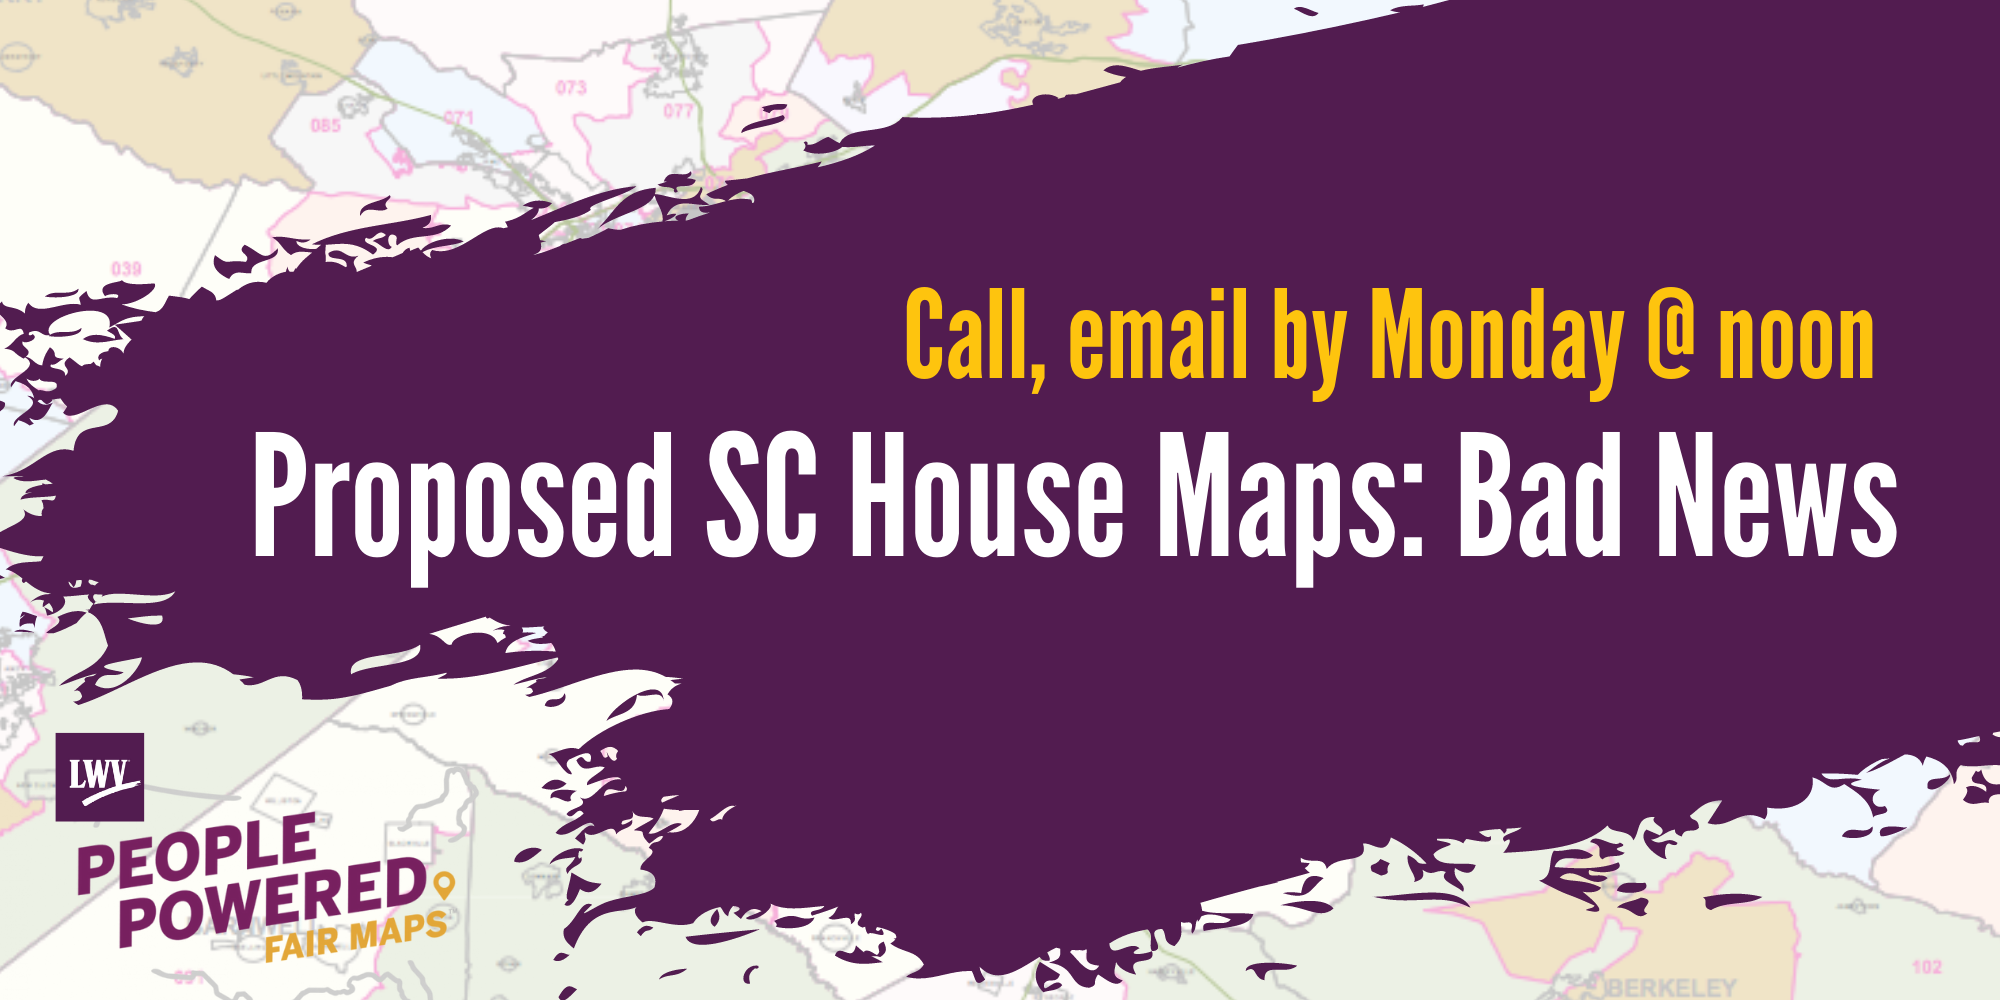 Proposed SC House Maps: Bad News 